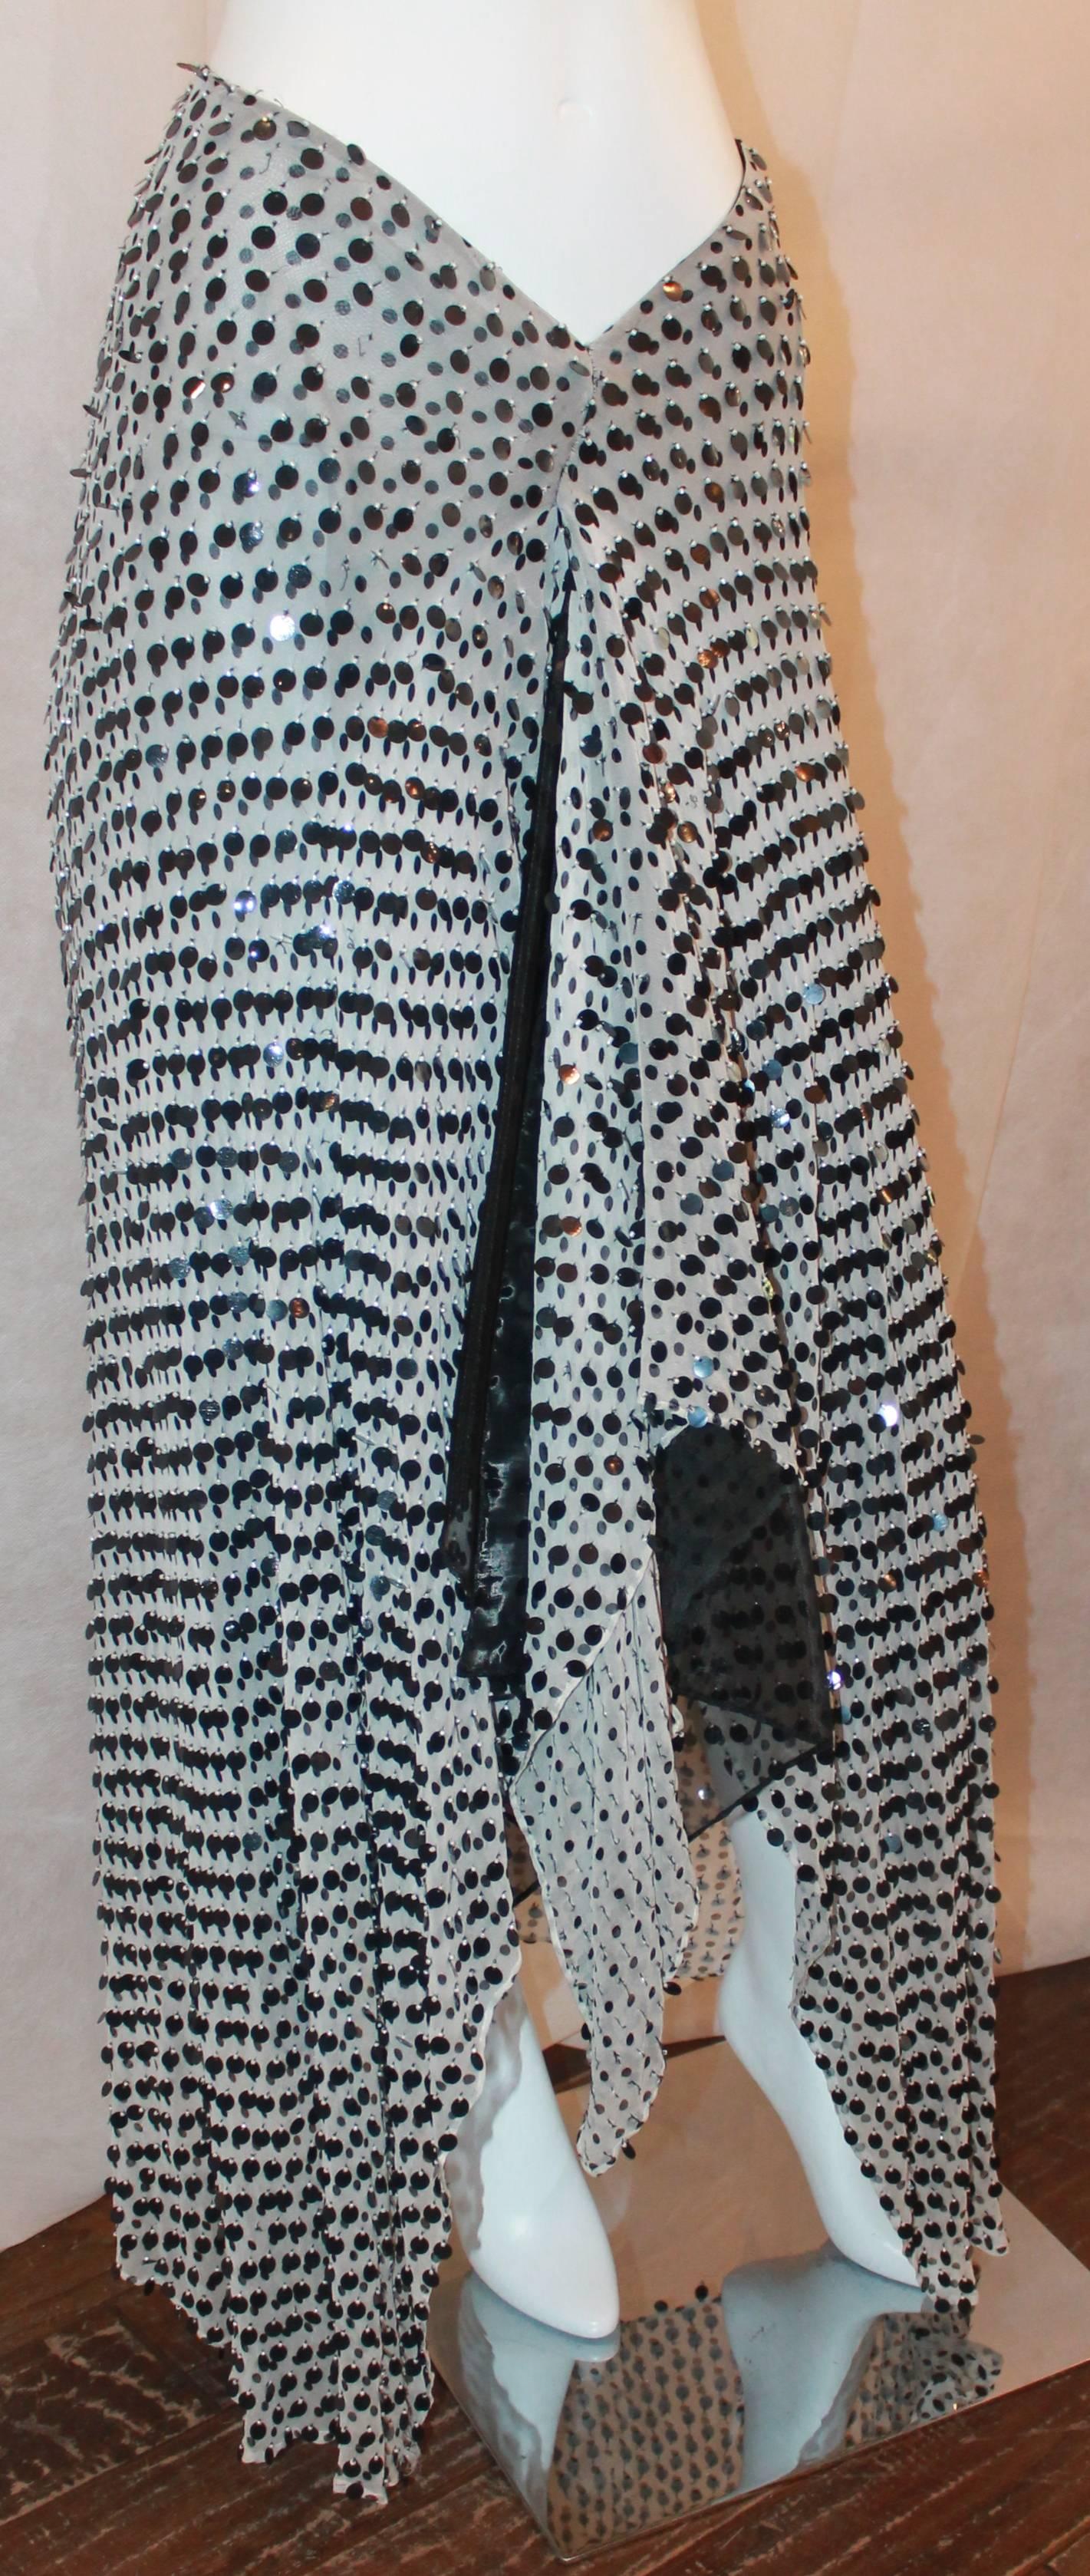 Giorgio Armani 1990's Black and White Chiffon High-Low Asymmetrical Palette Skirt - 42.  This beautiful skirt is in good condition with only very few not noticeable missing sequins.  It features a unique asymmetrical hem, an opening up to the waist,